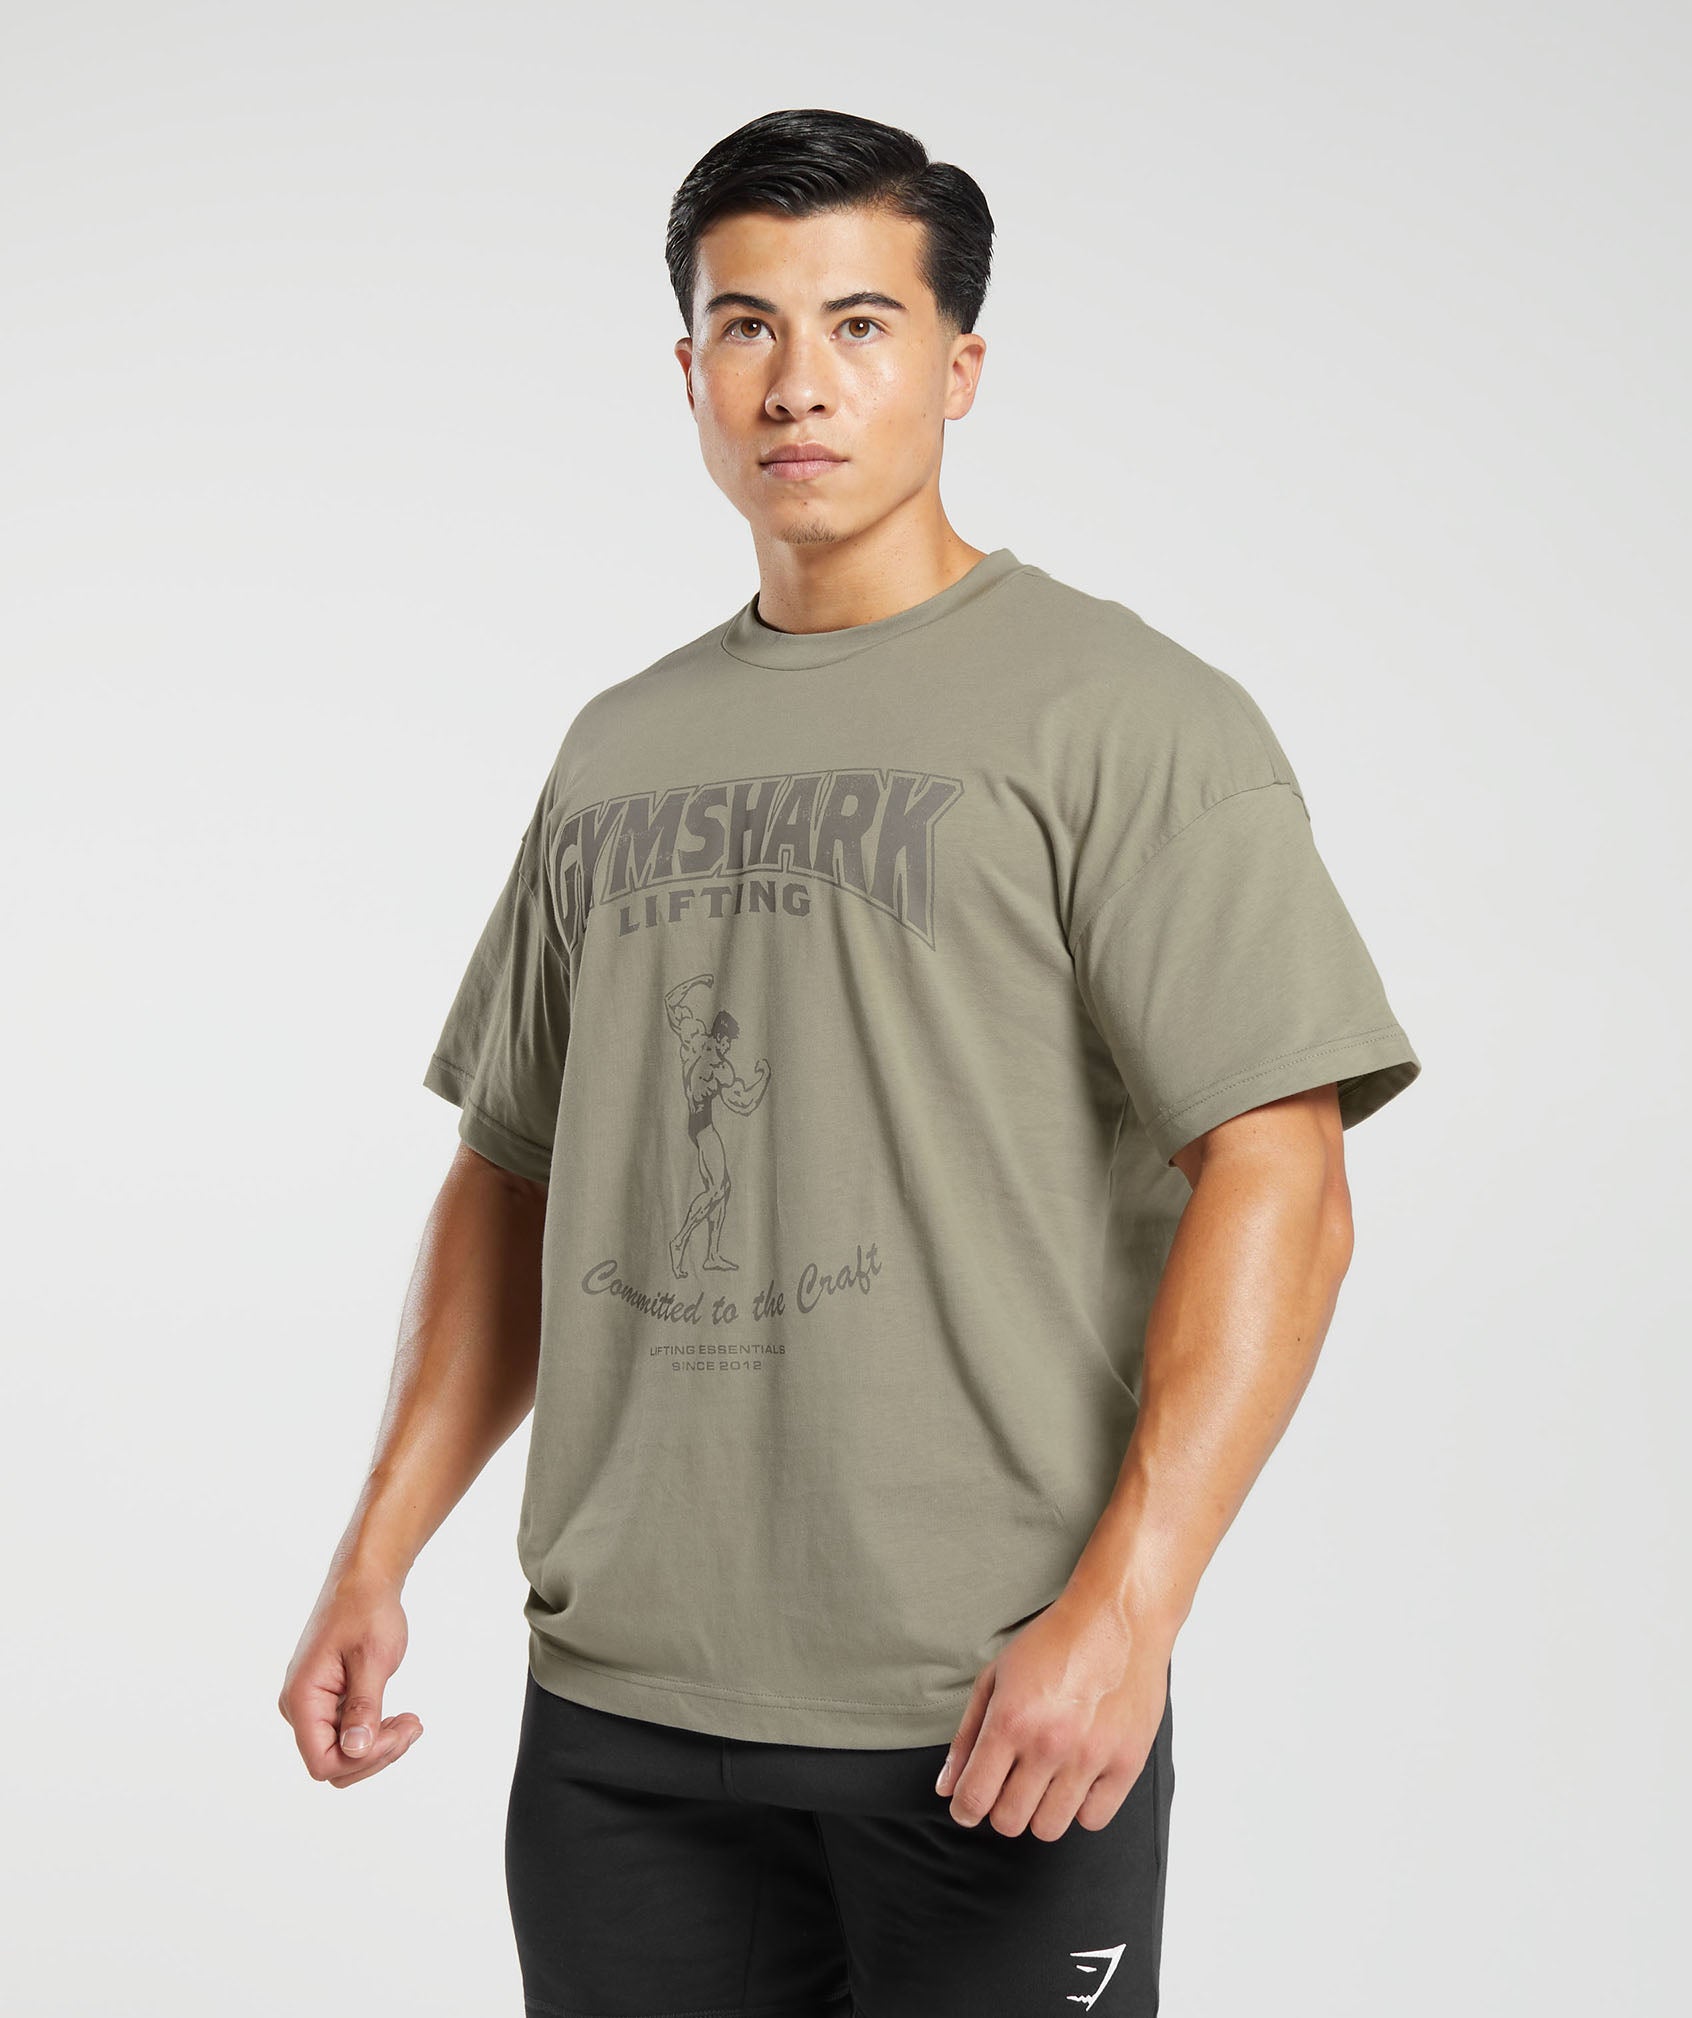 Committed to the Craft T-Shirt in Linen Brown - view 3